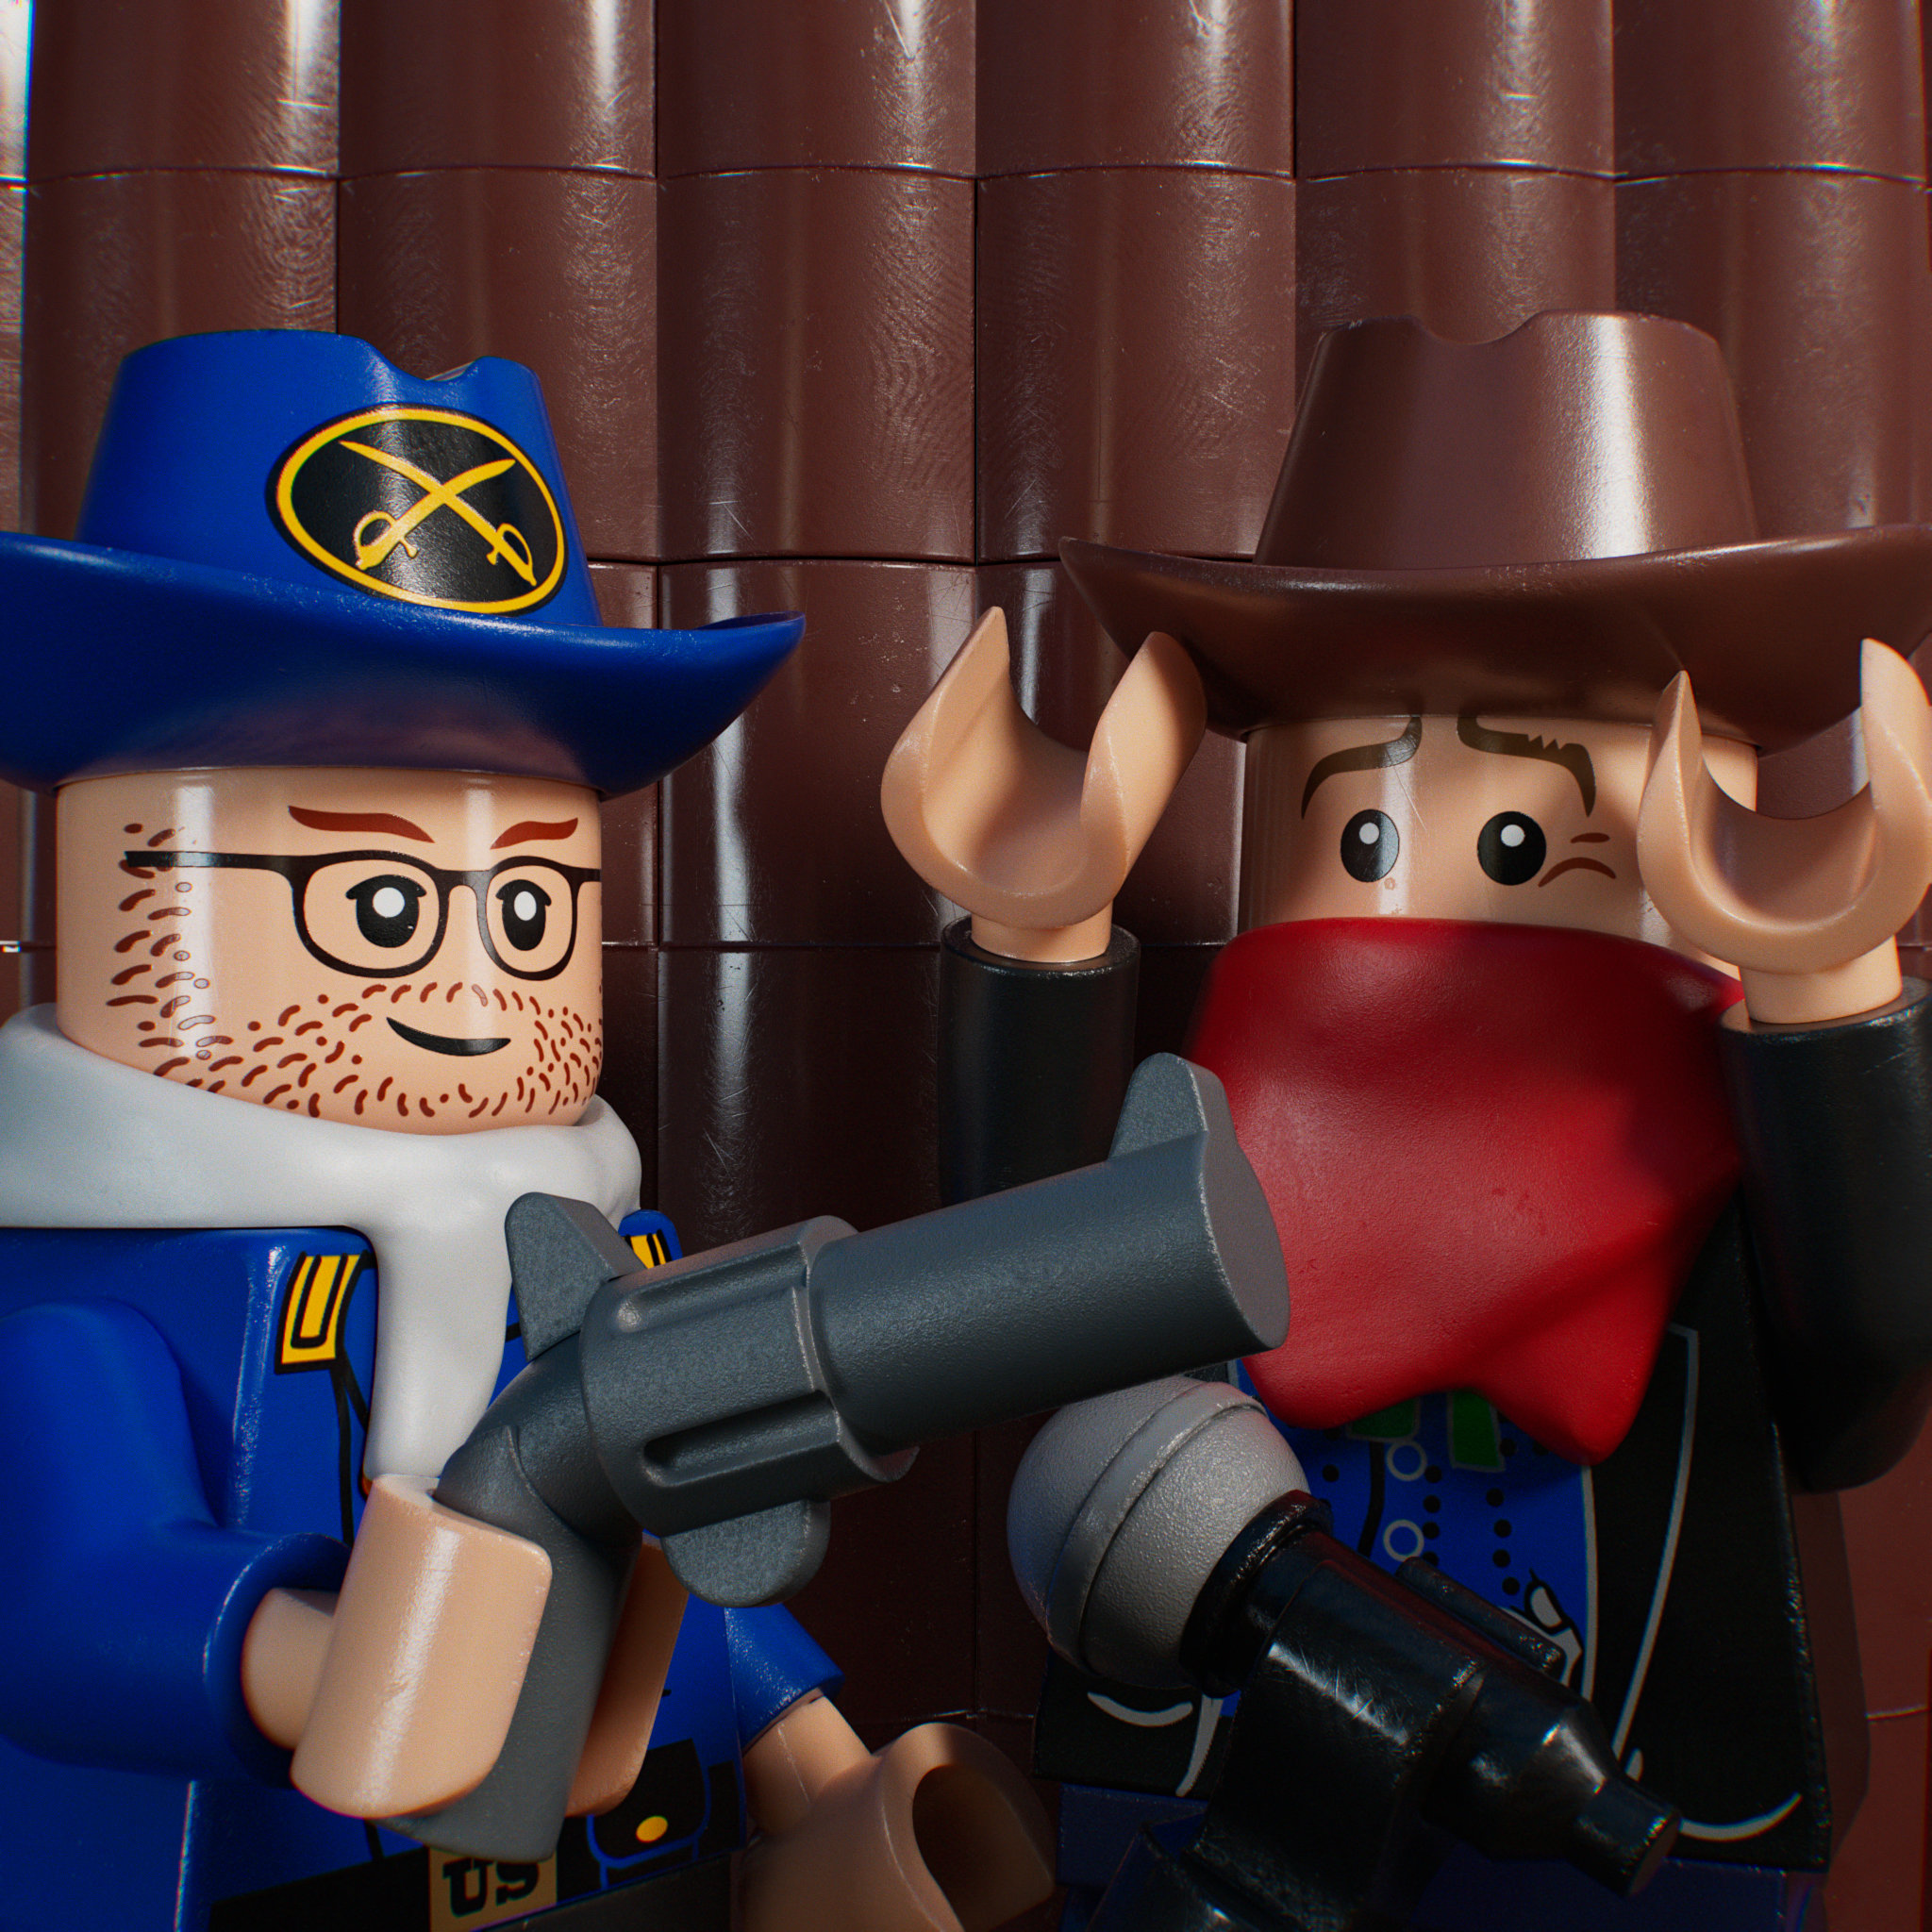 Ep. 5 – Guns, Dynamite and Money: LEGO from 1996